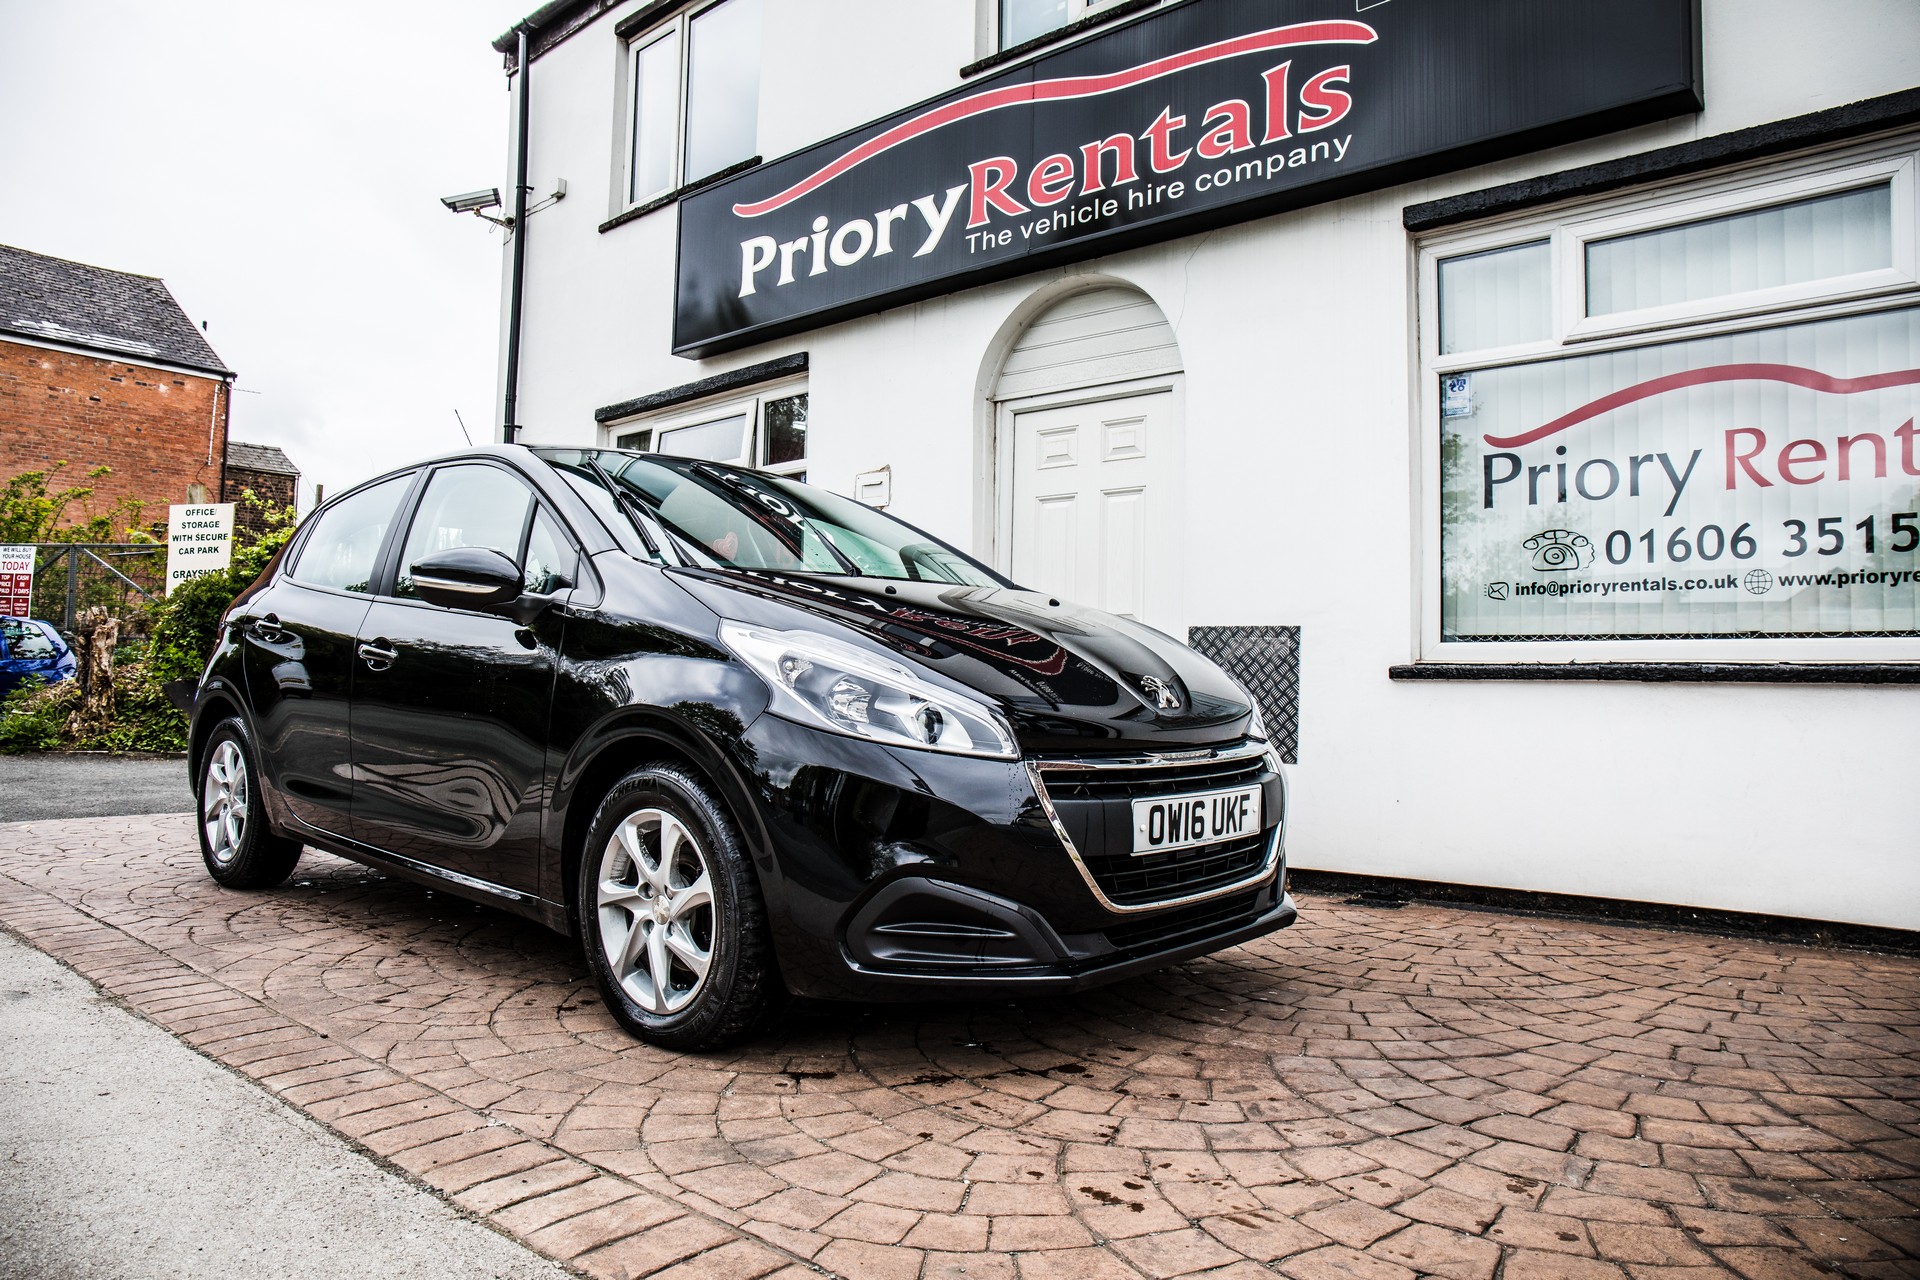 The Peugeot 208 HDI - Our Car of the Month For October